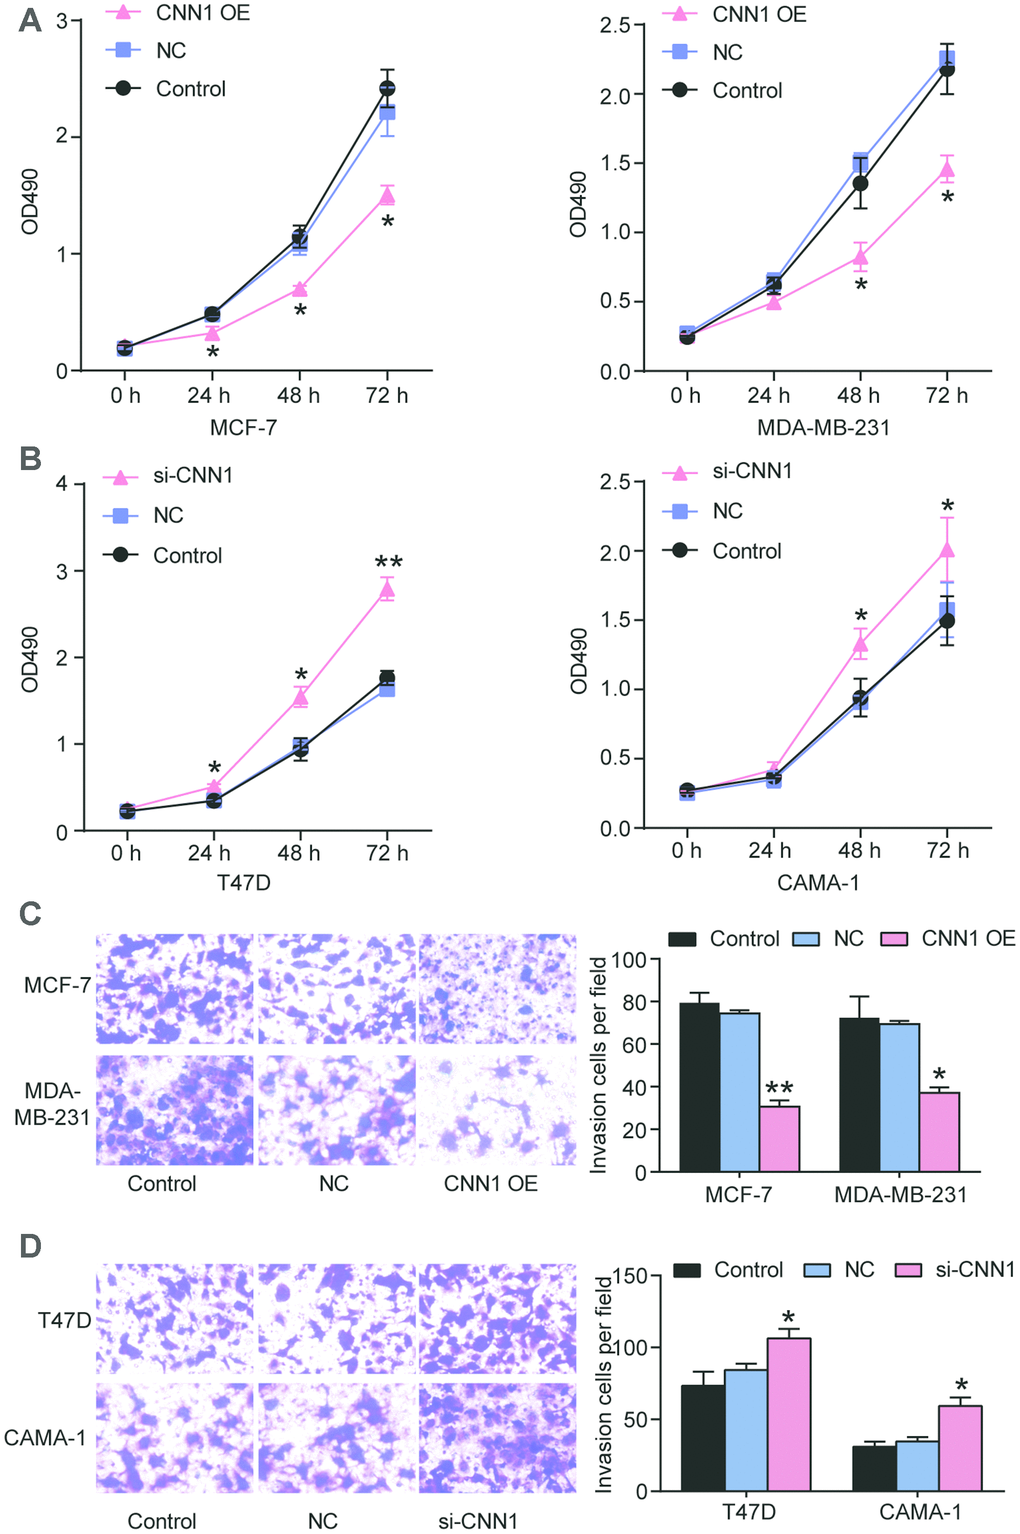 CNN1 inhibited cell proliferation and migration of breast cancer. (A) and (B) CNN1 overexpression inhibited cell proliferation in MCF-7 and MDA-MB-231 cells, while CNN1 knockdown promoted cell proliferation in T47D and CAMA-1 cells. CCK8 was performed to detect the ability of cell proliferation after the breast cancer cells (MCF-7, MDA-MB-231, T47D, and CAMA-1 cells) treated with negative control, CNN1 overexpression or CNN1 siRNA for 0 h, 24 h, 48 h, and 72 h. (C) and (D) CNN1 overexpression inhibited cell invasion in MCF-7 and MDA-MB-231 cells, while CNN1 knockdown promoted cell invasion in T47D and CAMA-1 cells. The cell invasion after CNN1 overexpression or CNN1 knockdown for 24 h was measured using transwell invasion assay. Control, the cells were cultured without any treatment. NC, the cells were treated with the negative control. CNN1 OE, the cells were treated with CNN1 overexpression. si-CNN1, the cells were transfected with CNN1 siRNA. *P